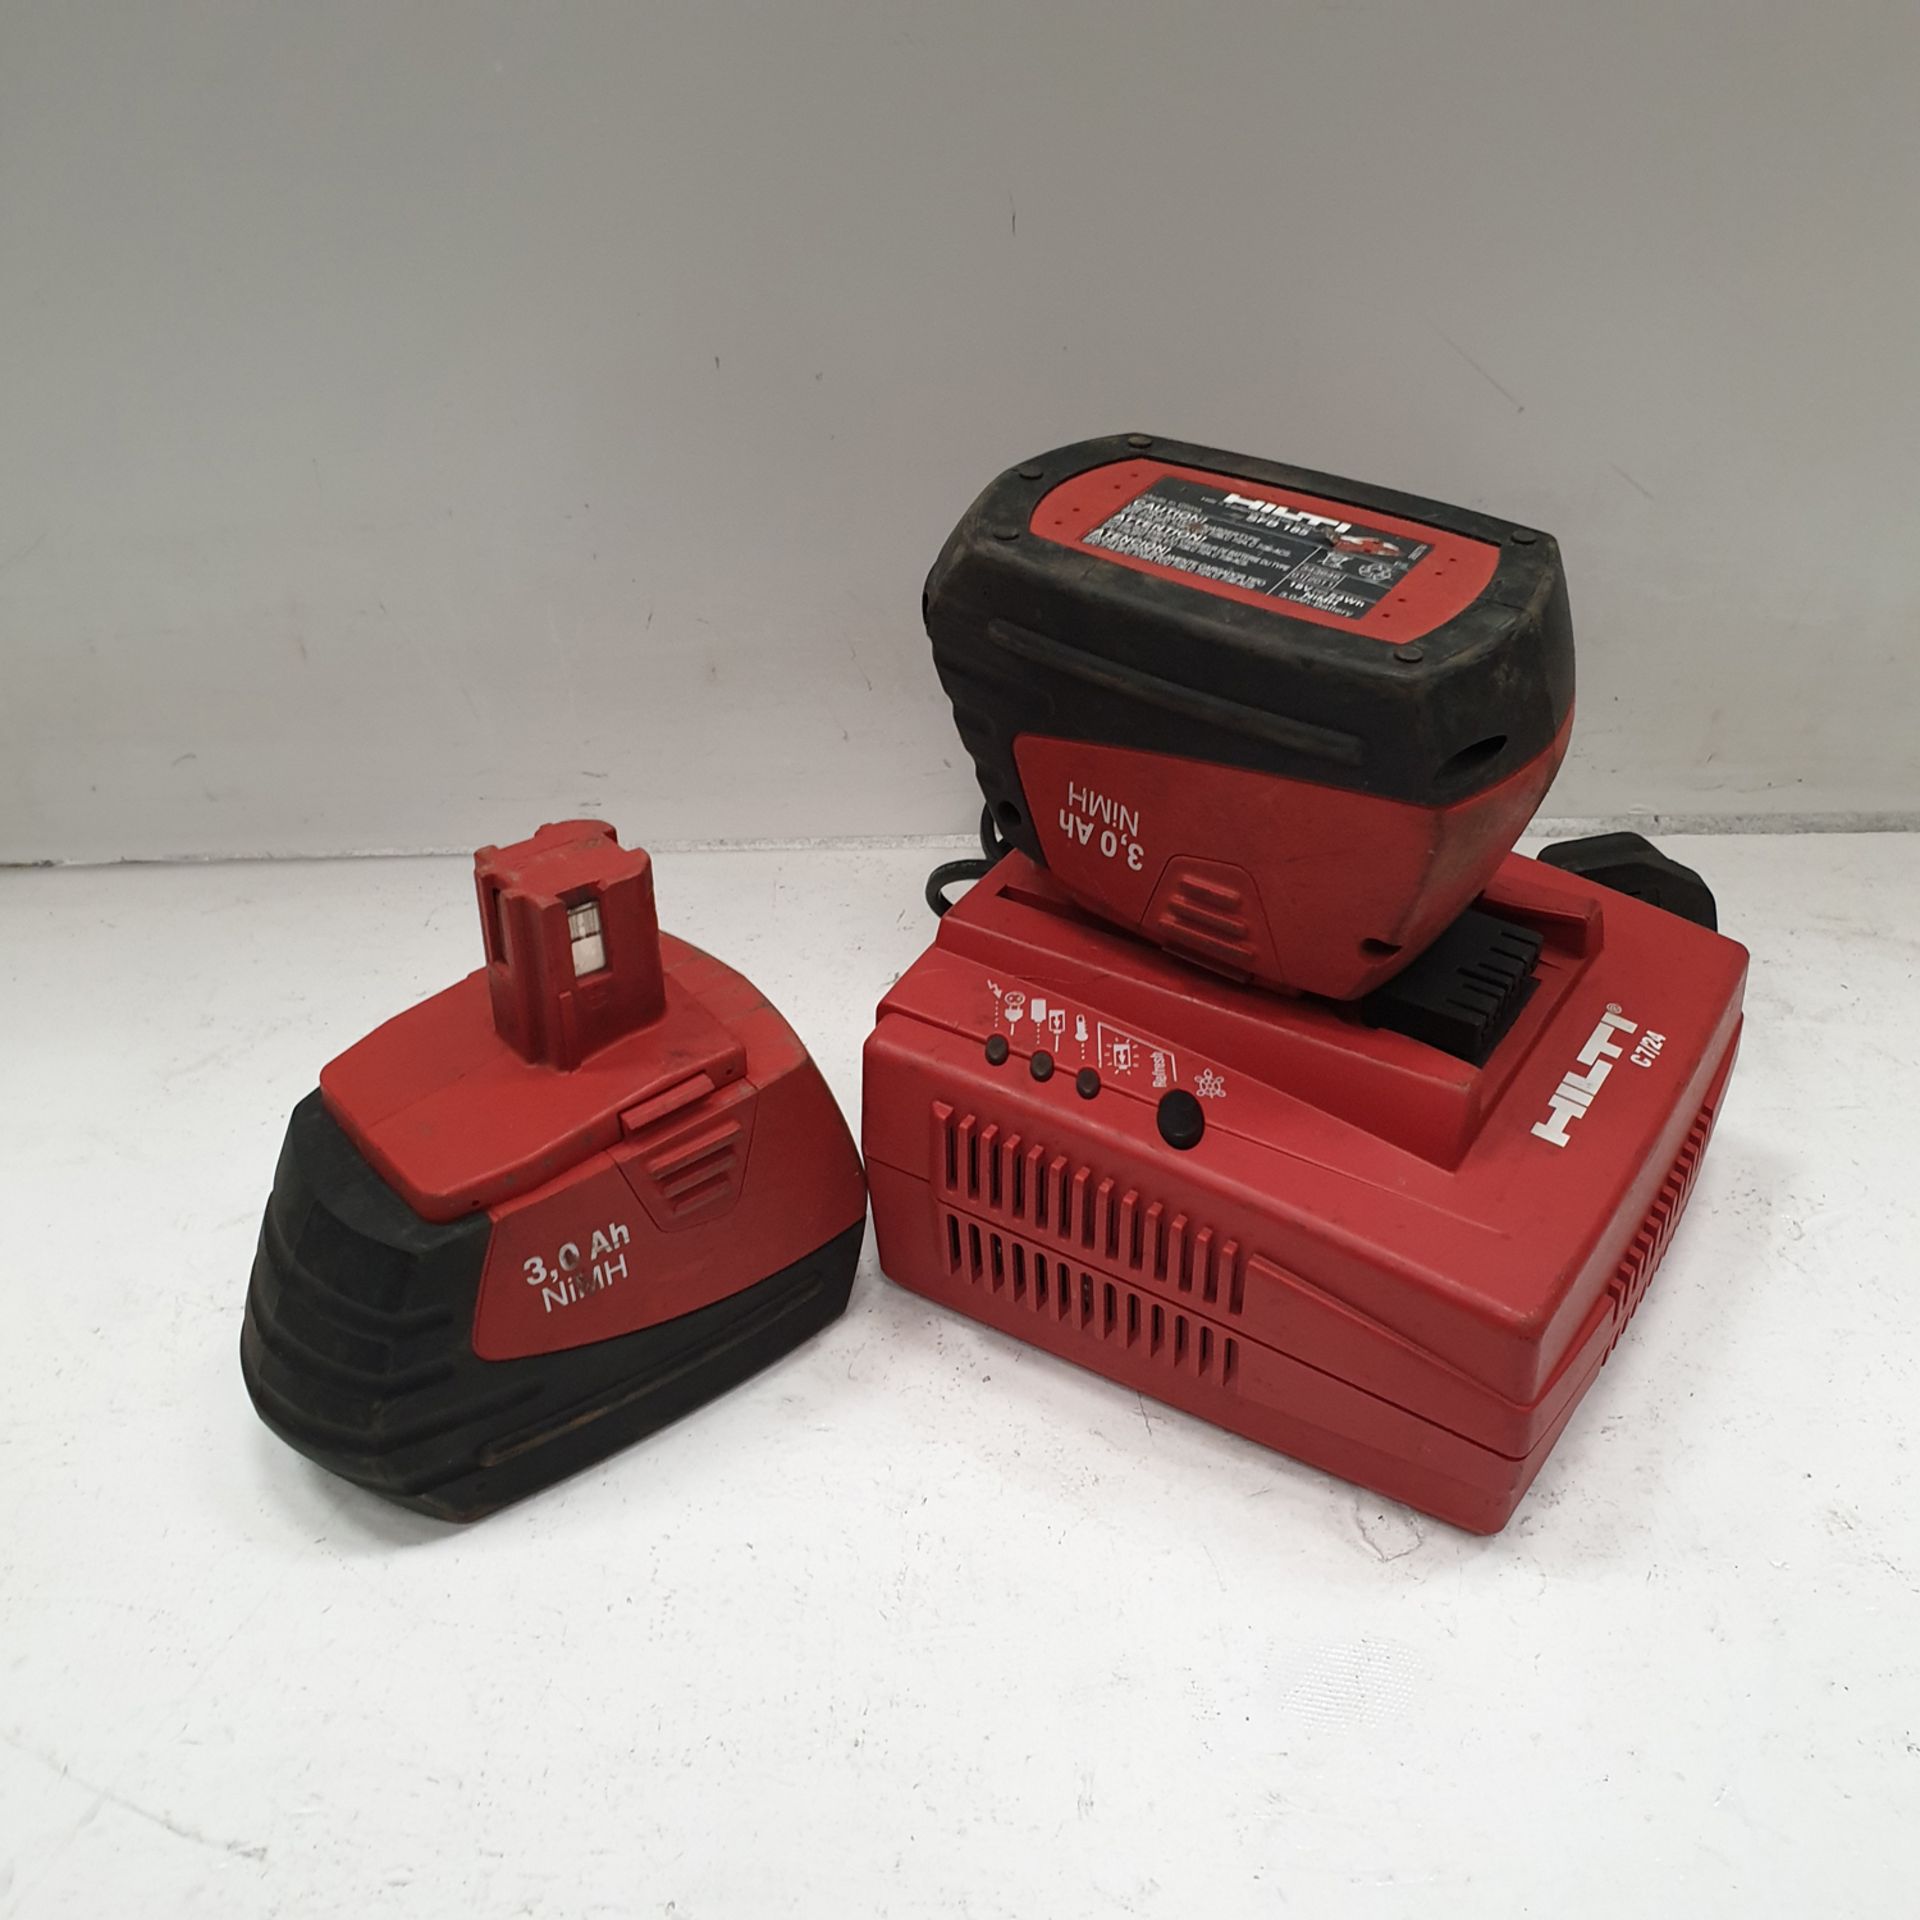 HILTI C7/24 Battery Charger. With 2 Batteries. - Image 3 of 3